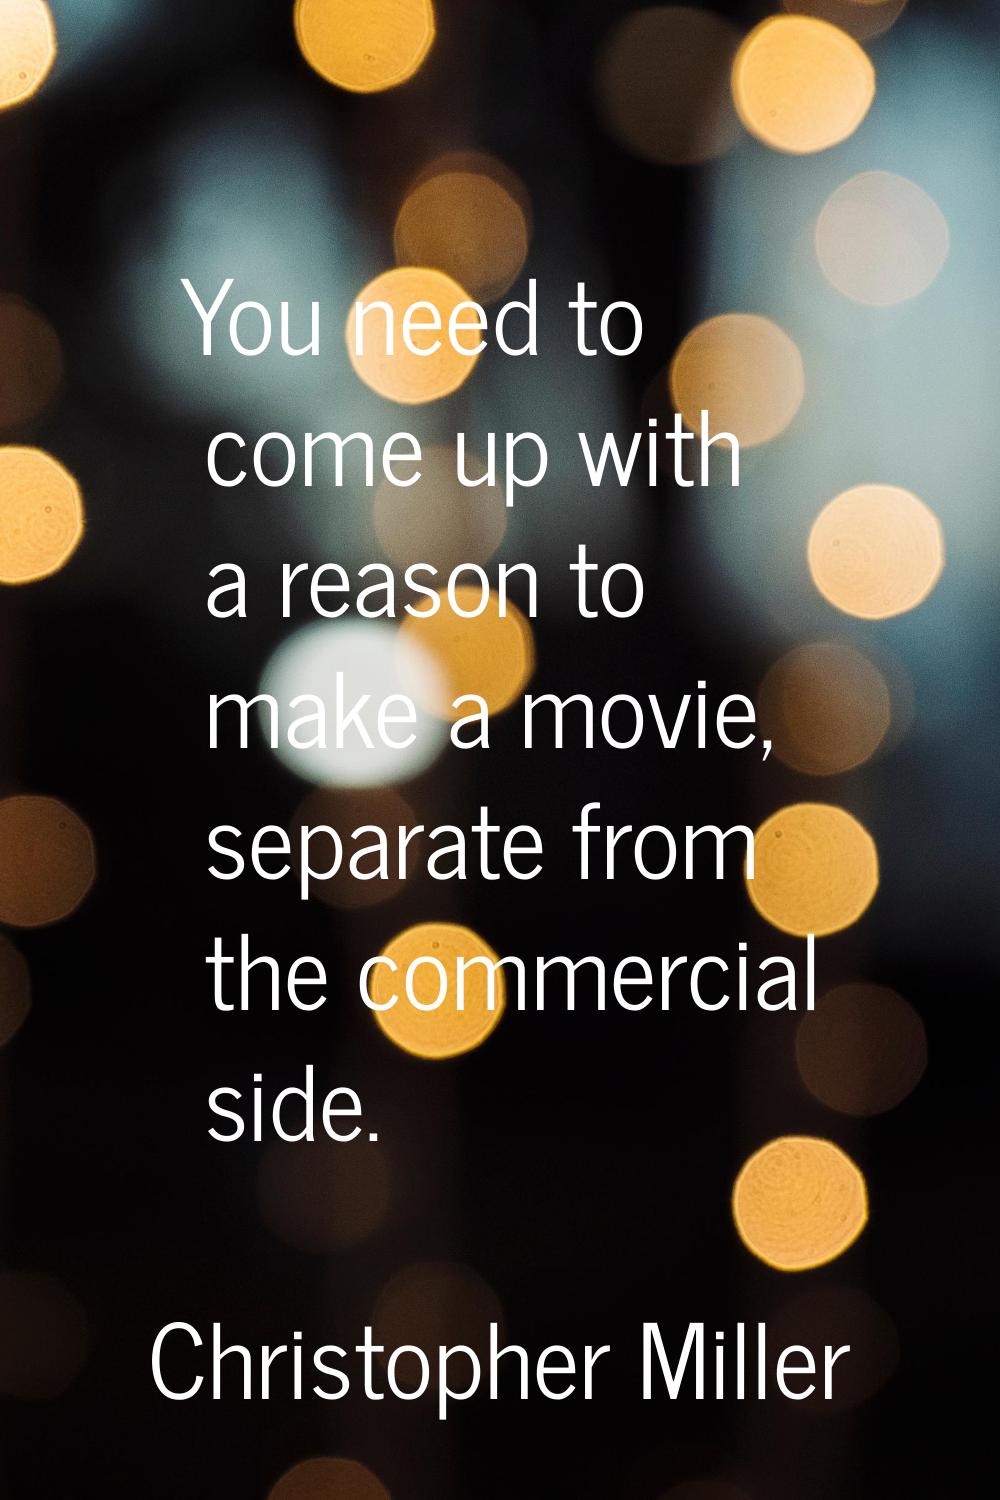 You need to come up with a reason to make a movie, separate from the commercial side.